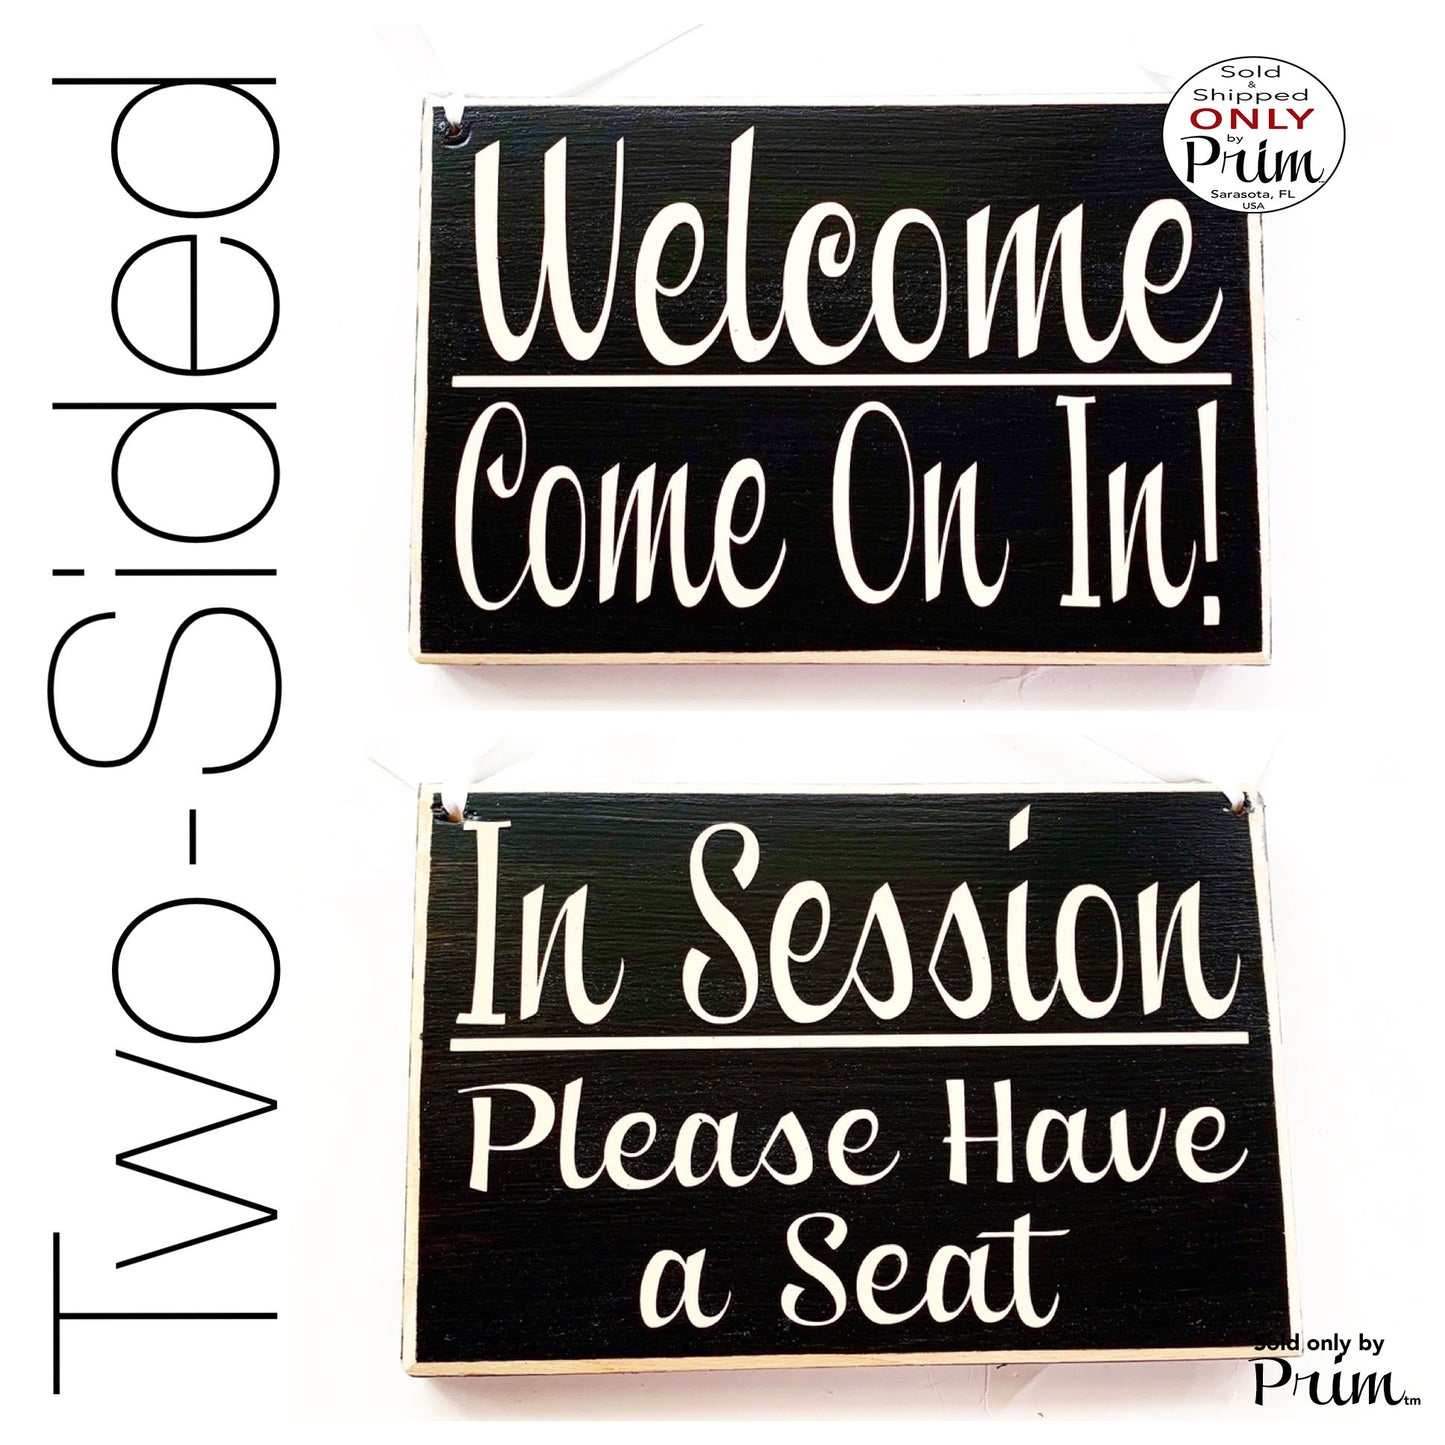 Two Sided 8x6 In Session Please Have a Seat Welcome Com In Custom Wood Sign Open Closed Please Do Not Disturb Spa Salon Office Door Hanger